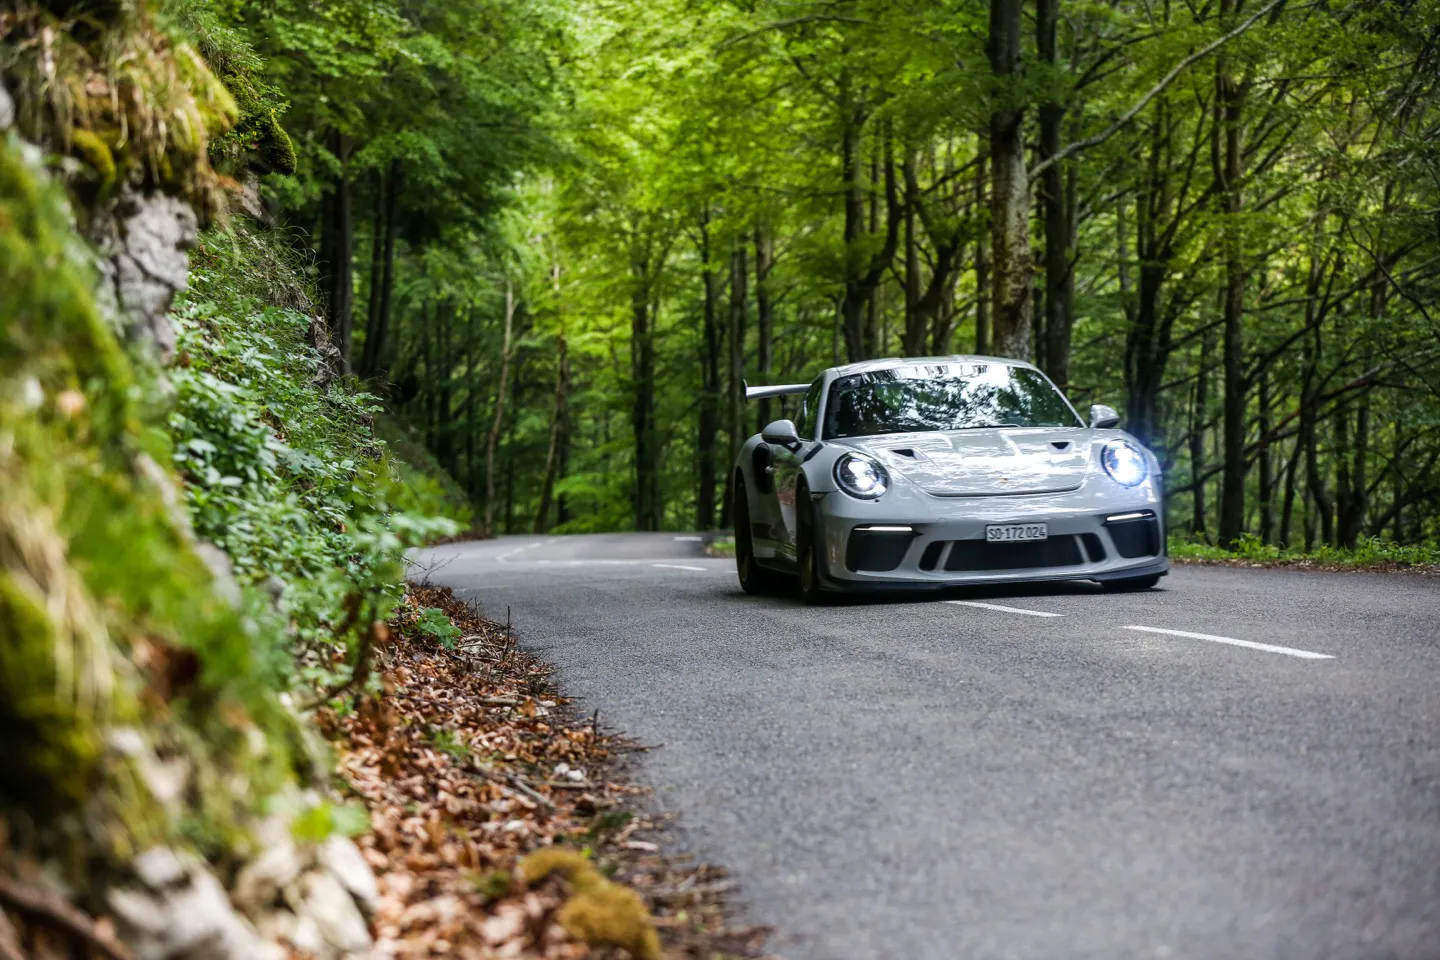 Porsche on a supercar driving tour through the backroads of Germany